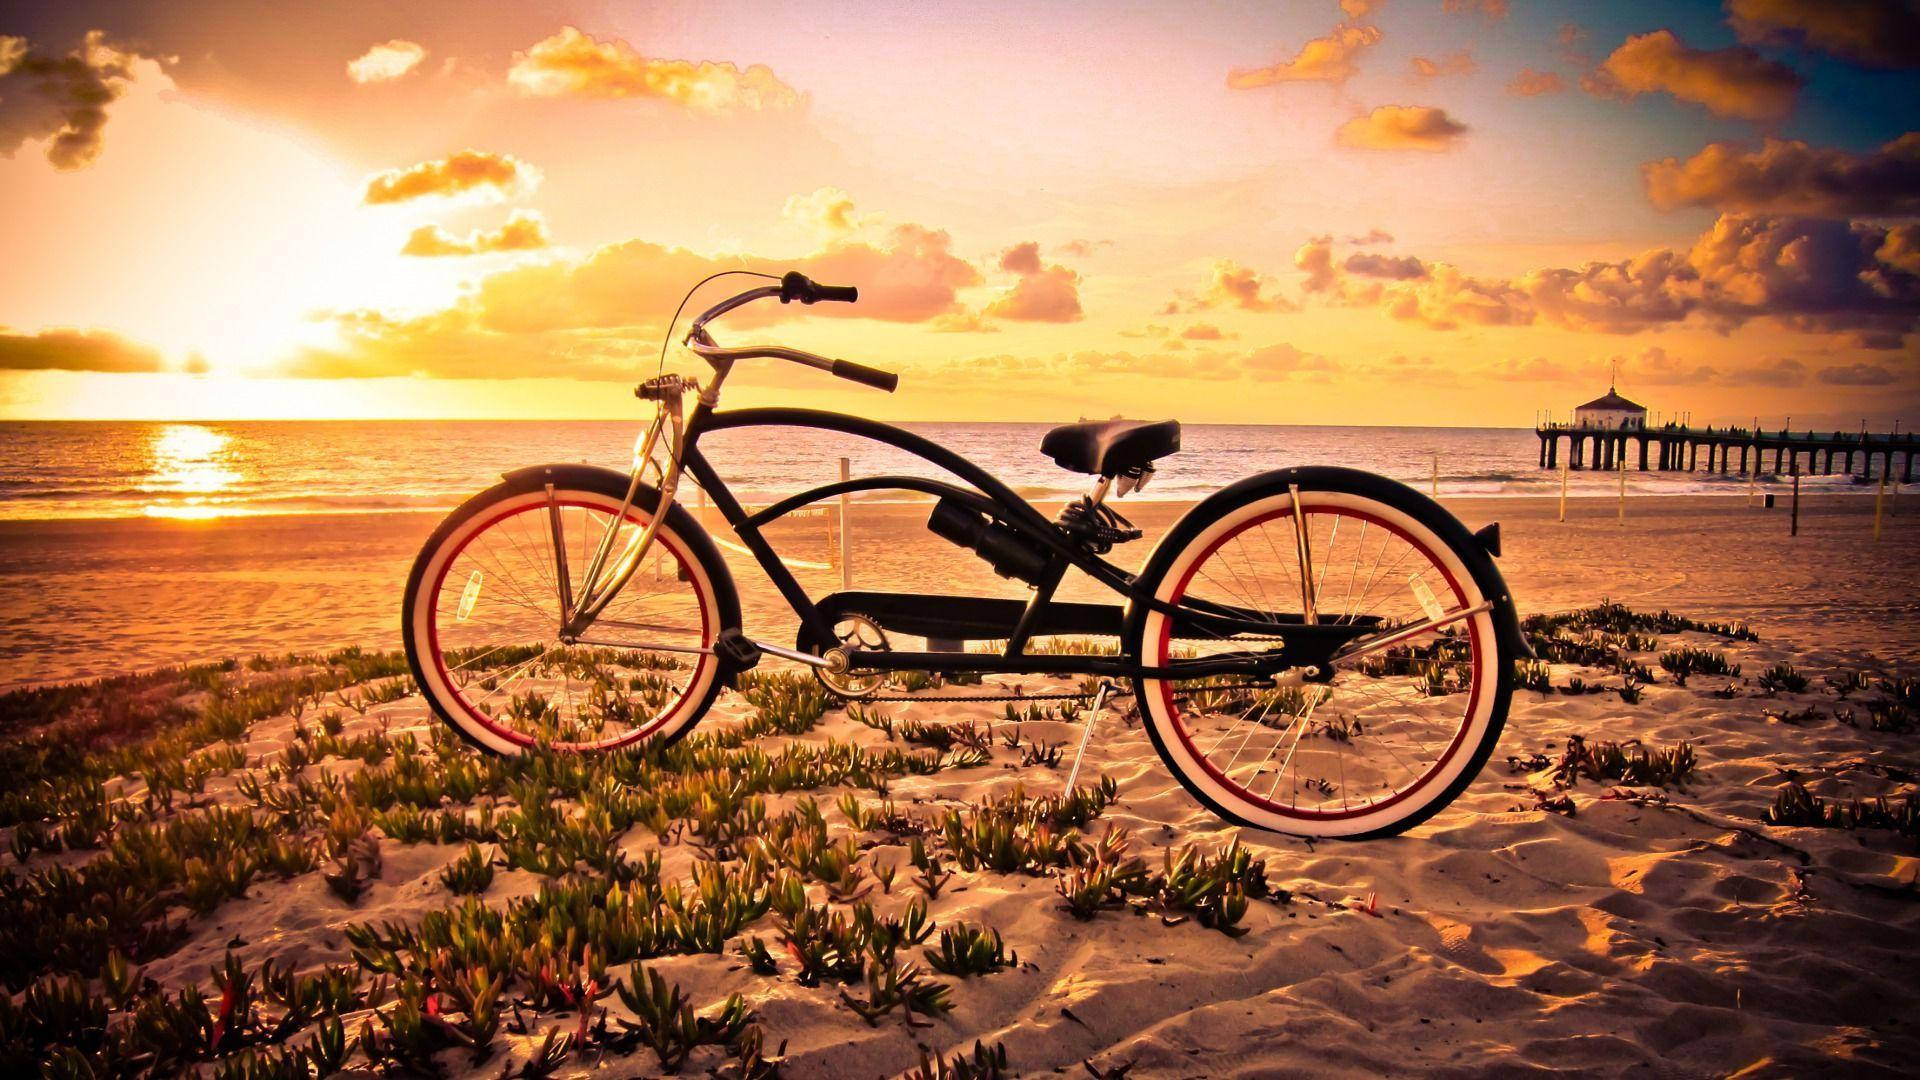 Cruiser Bicycle On Sand Wallpaper